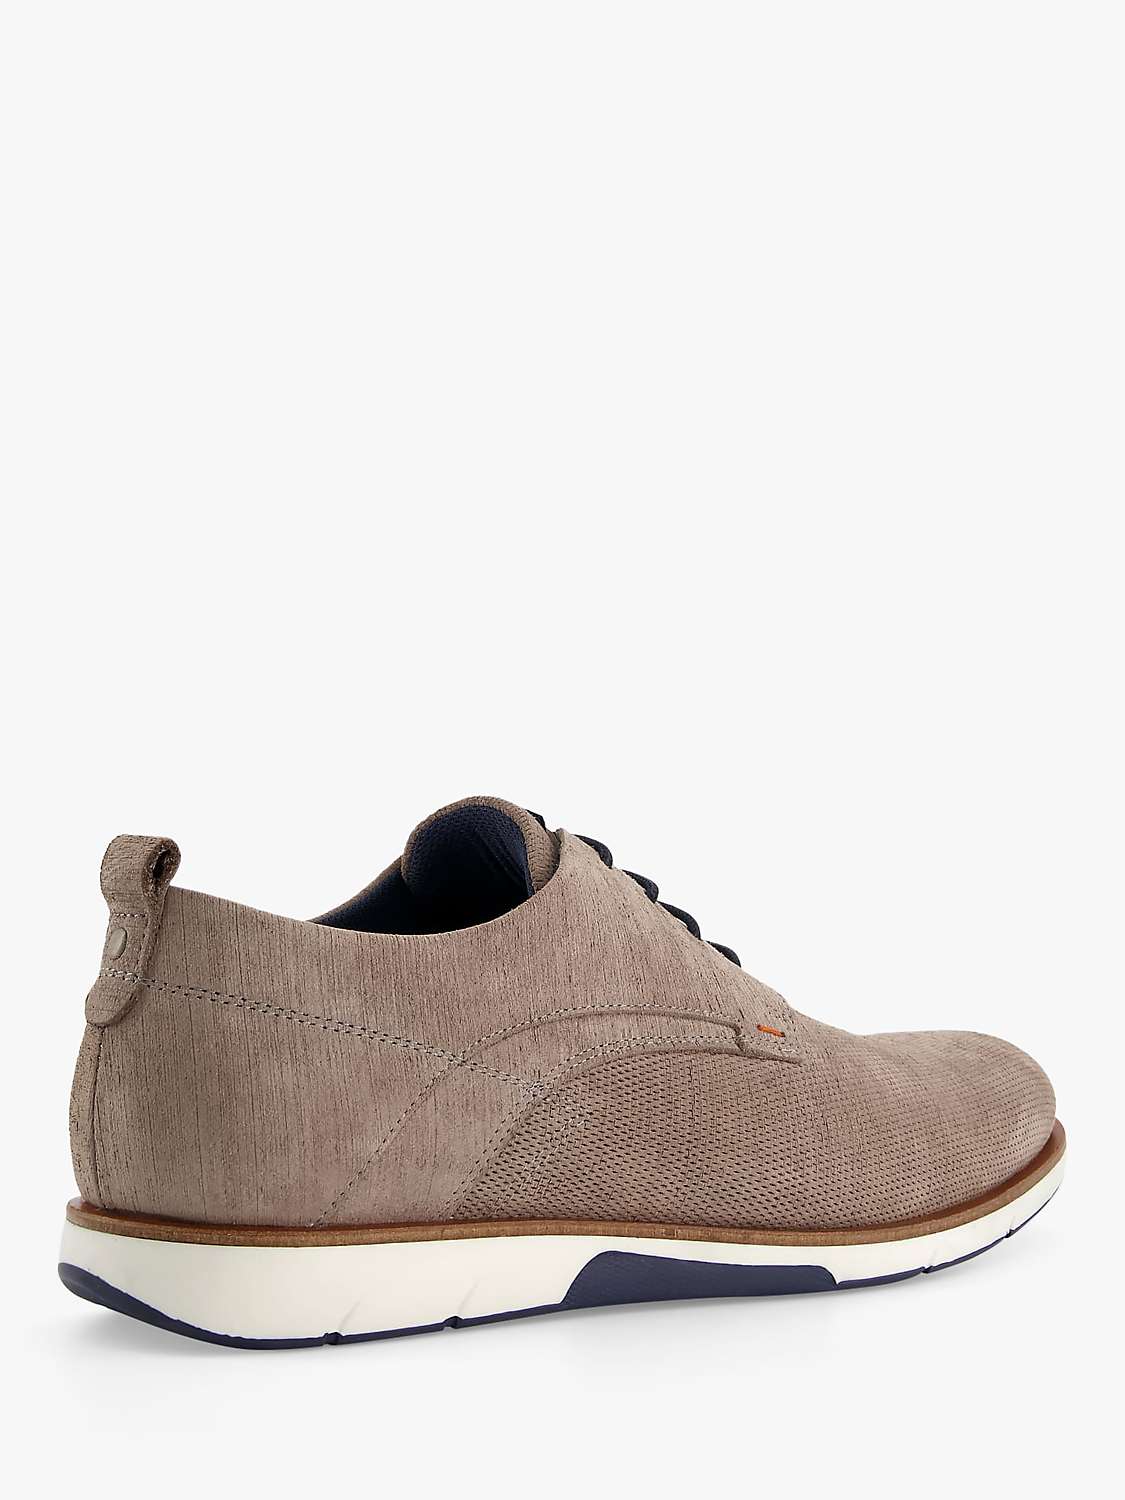 Dune Balad Wide Fit Nubuck Punch Hole Casual Shoes, Grey at John Lewis ...